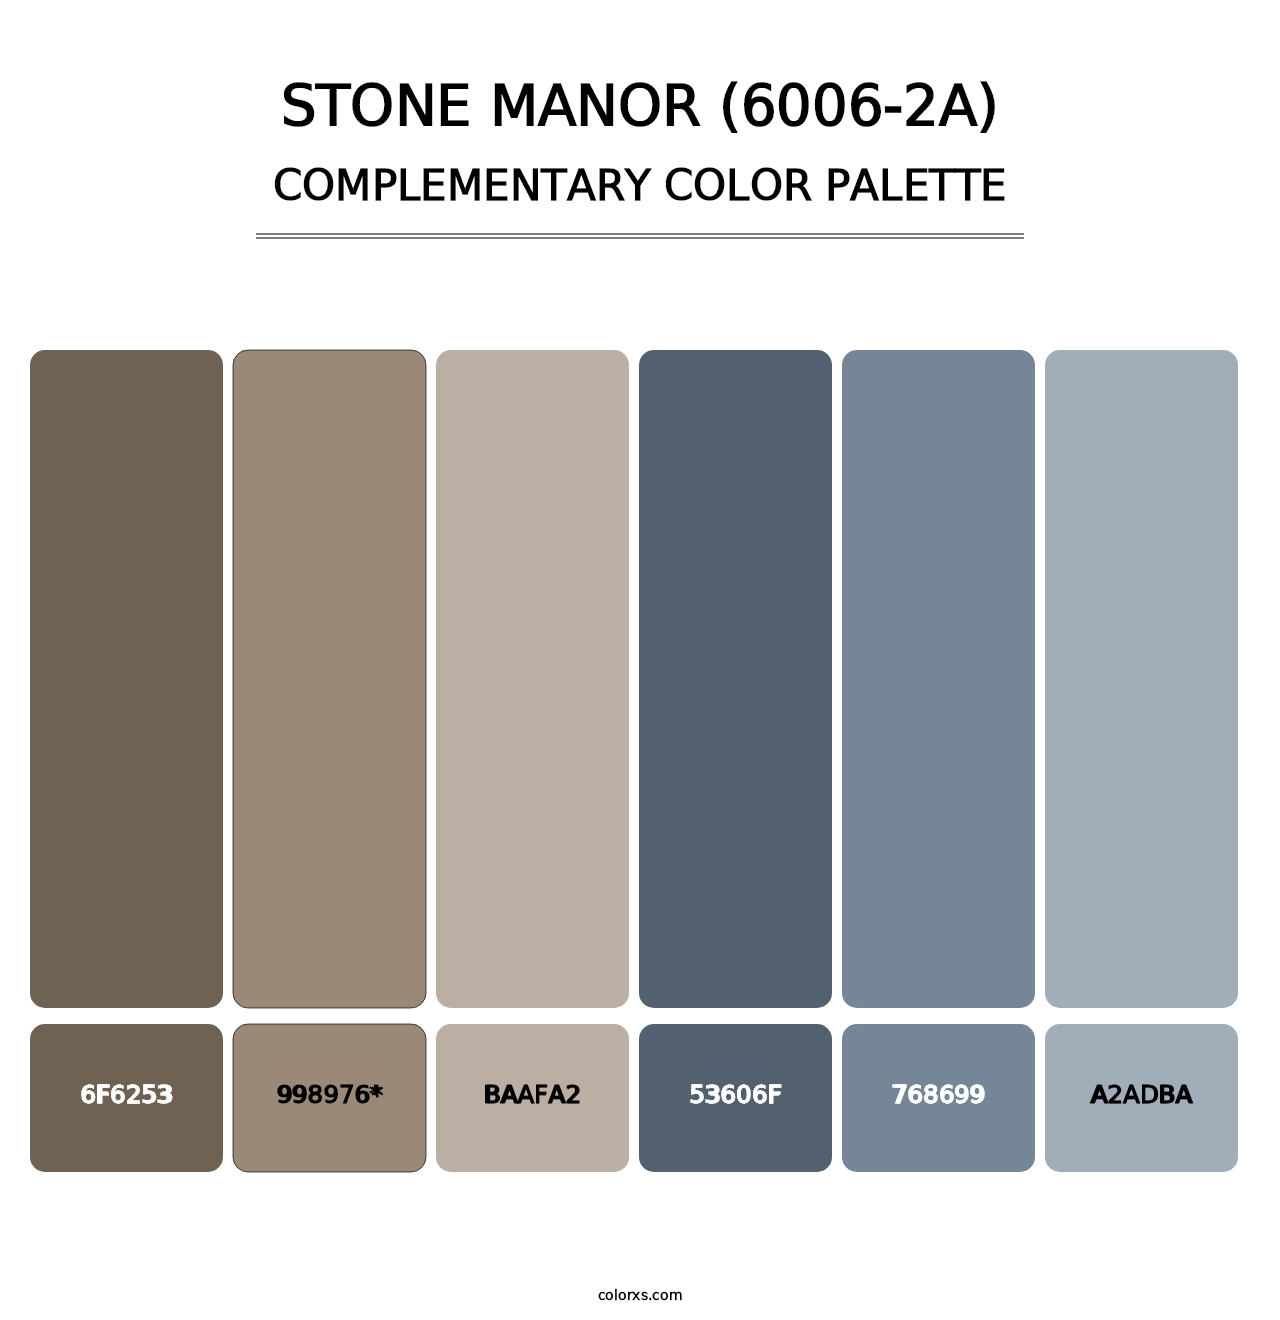 Stone Manor (6006-2A) - Complementary Color Palette